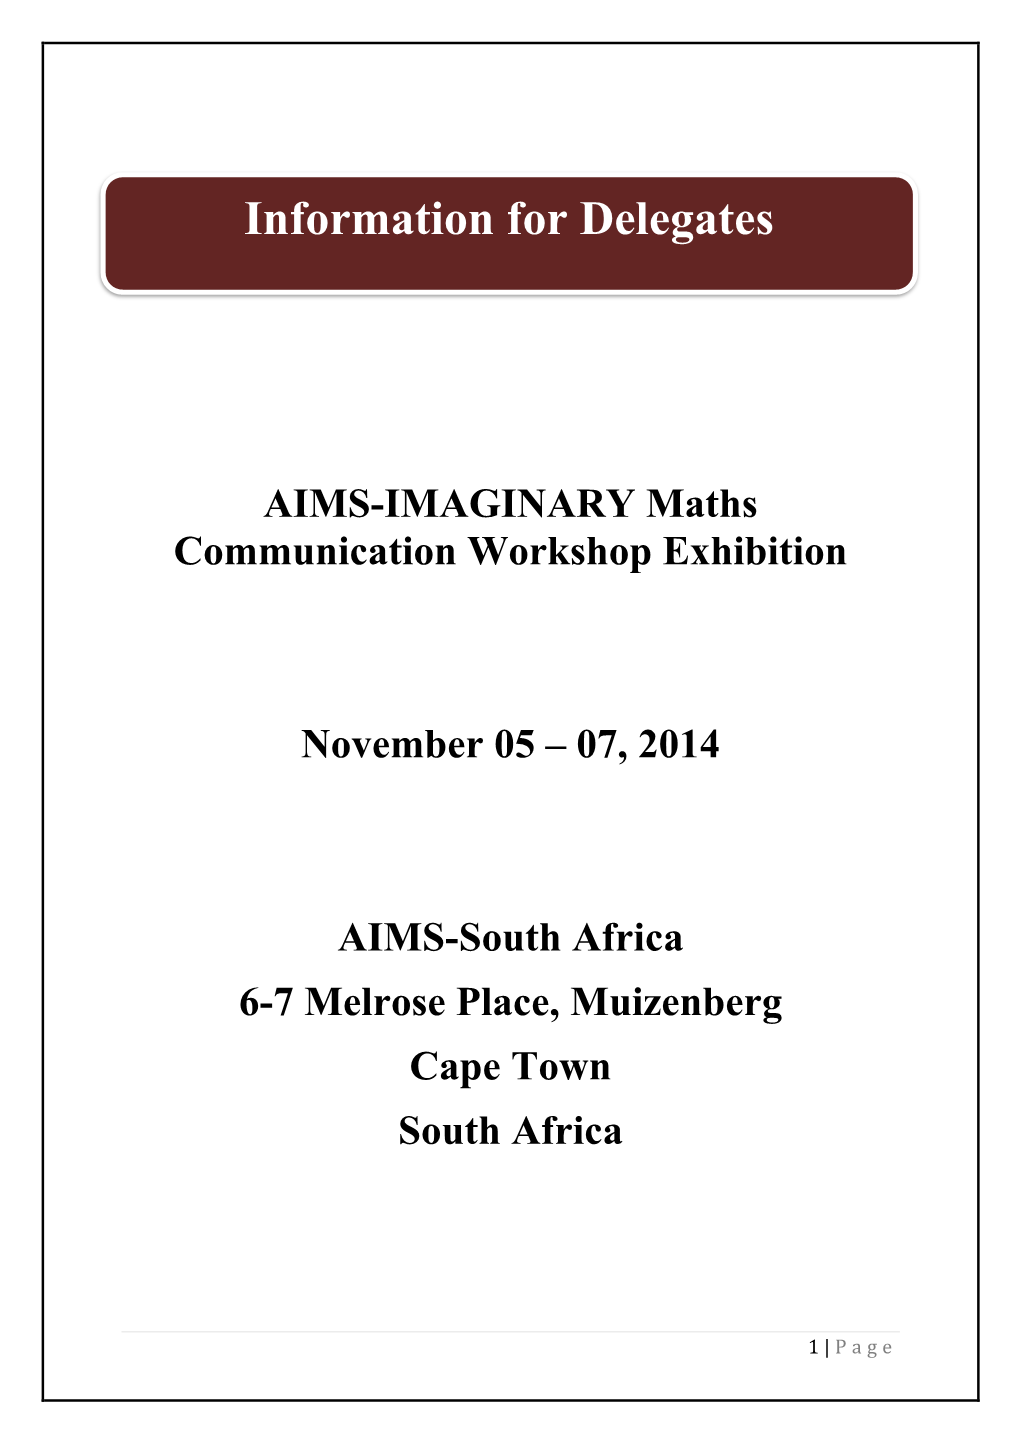 AIMS-IMAGINARY Information for Delegates